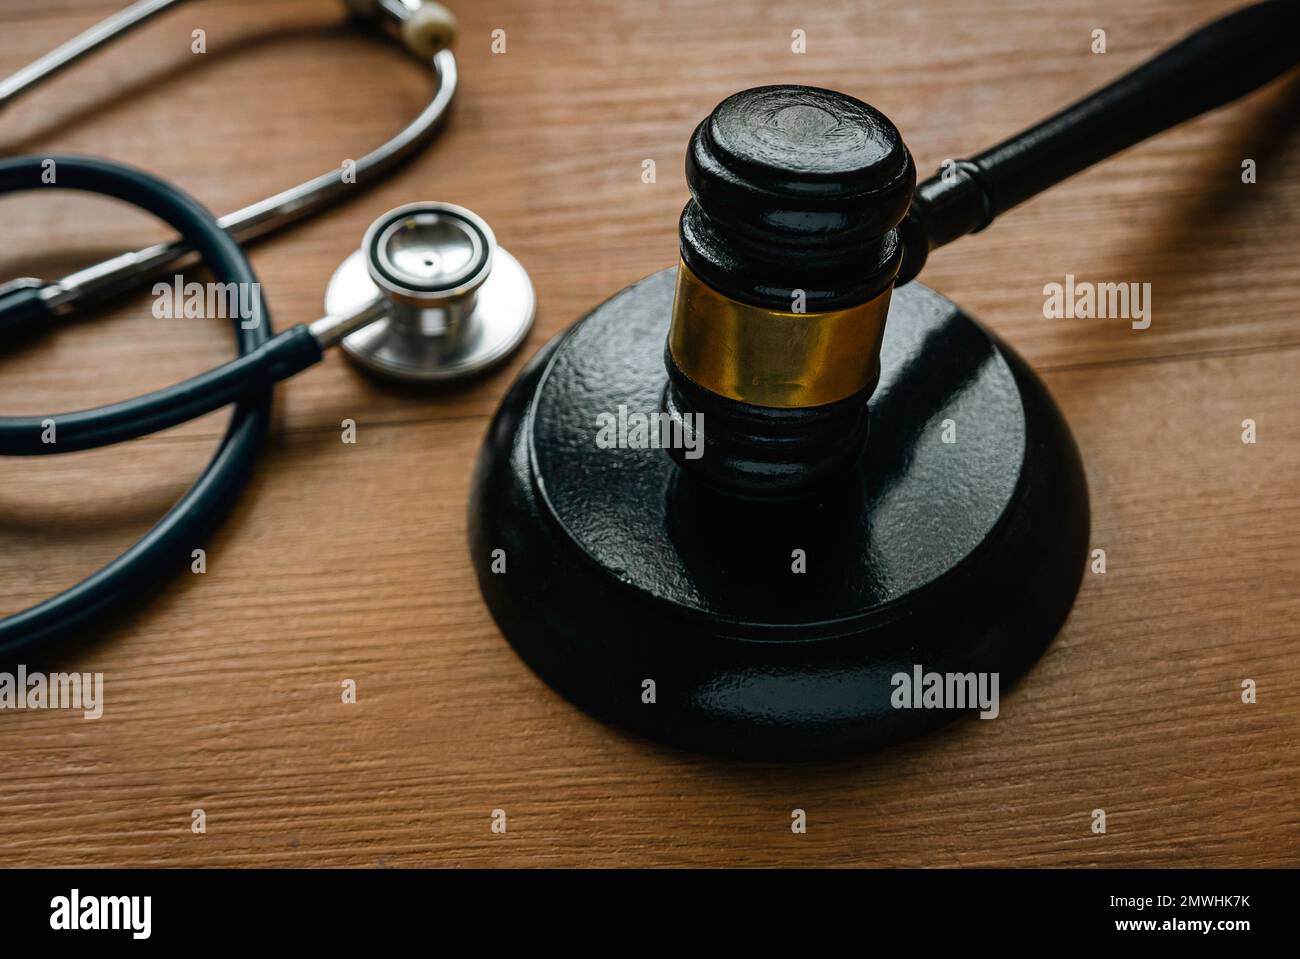 Law in healthcare and medical. Medical malpractice, personal injury law.Judgement of common mistakes made by nurses,doctors or hospital. Stock Photo